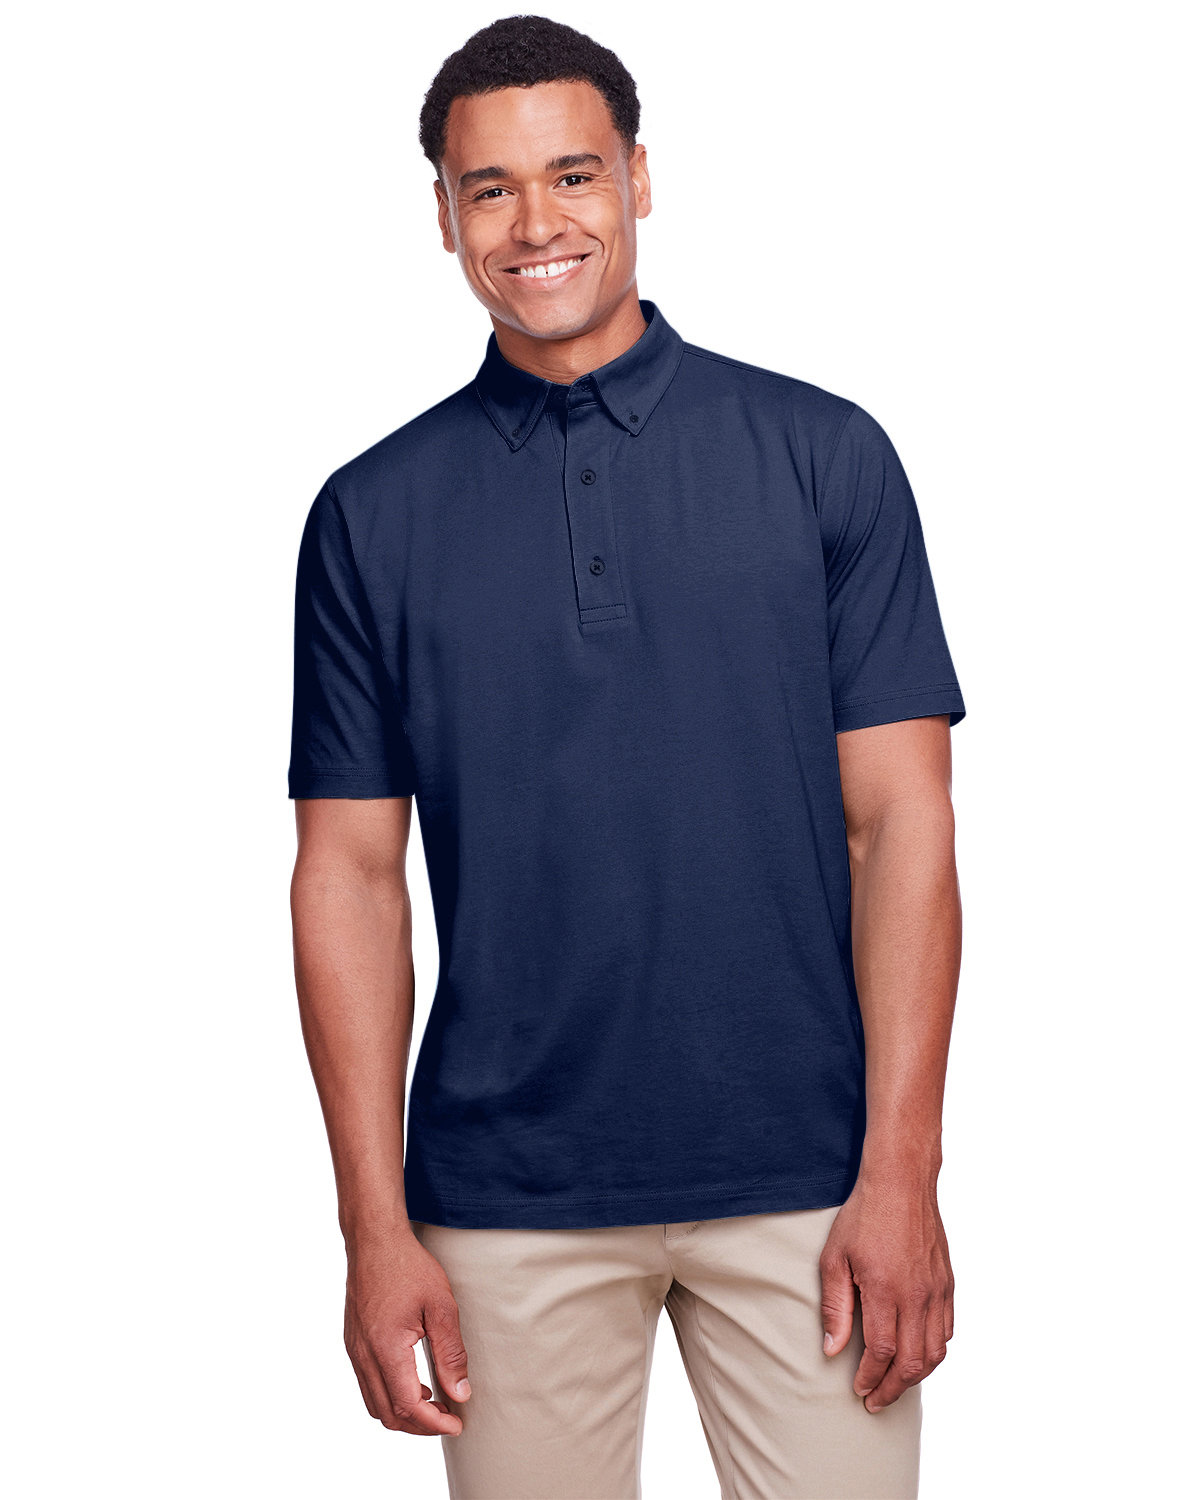 UltraClub Men's Lakeshore Stretch Cotton Performance Polo navy 